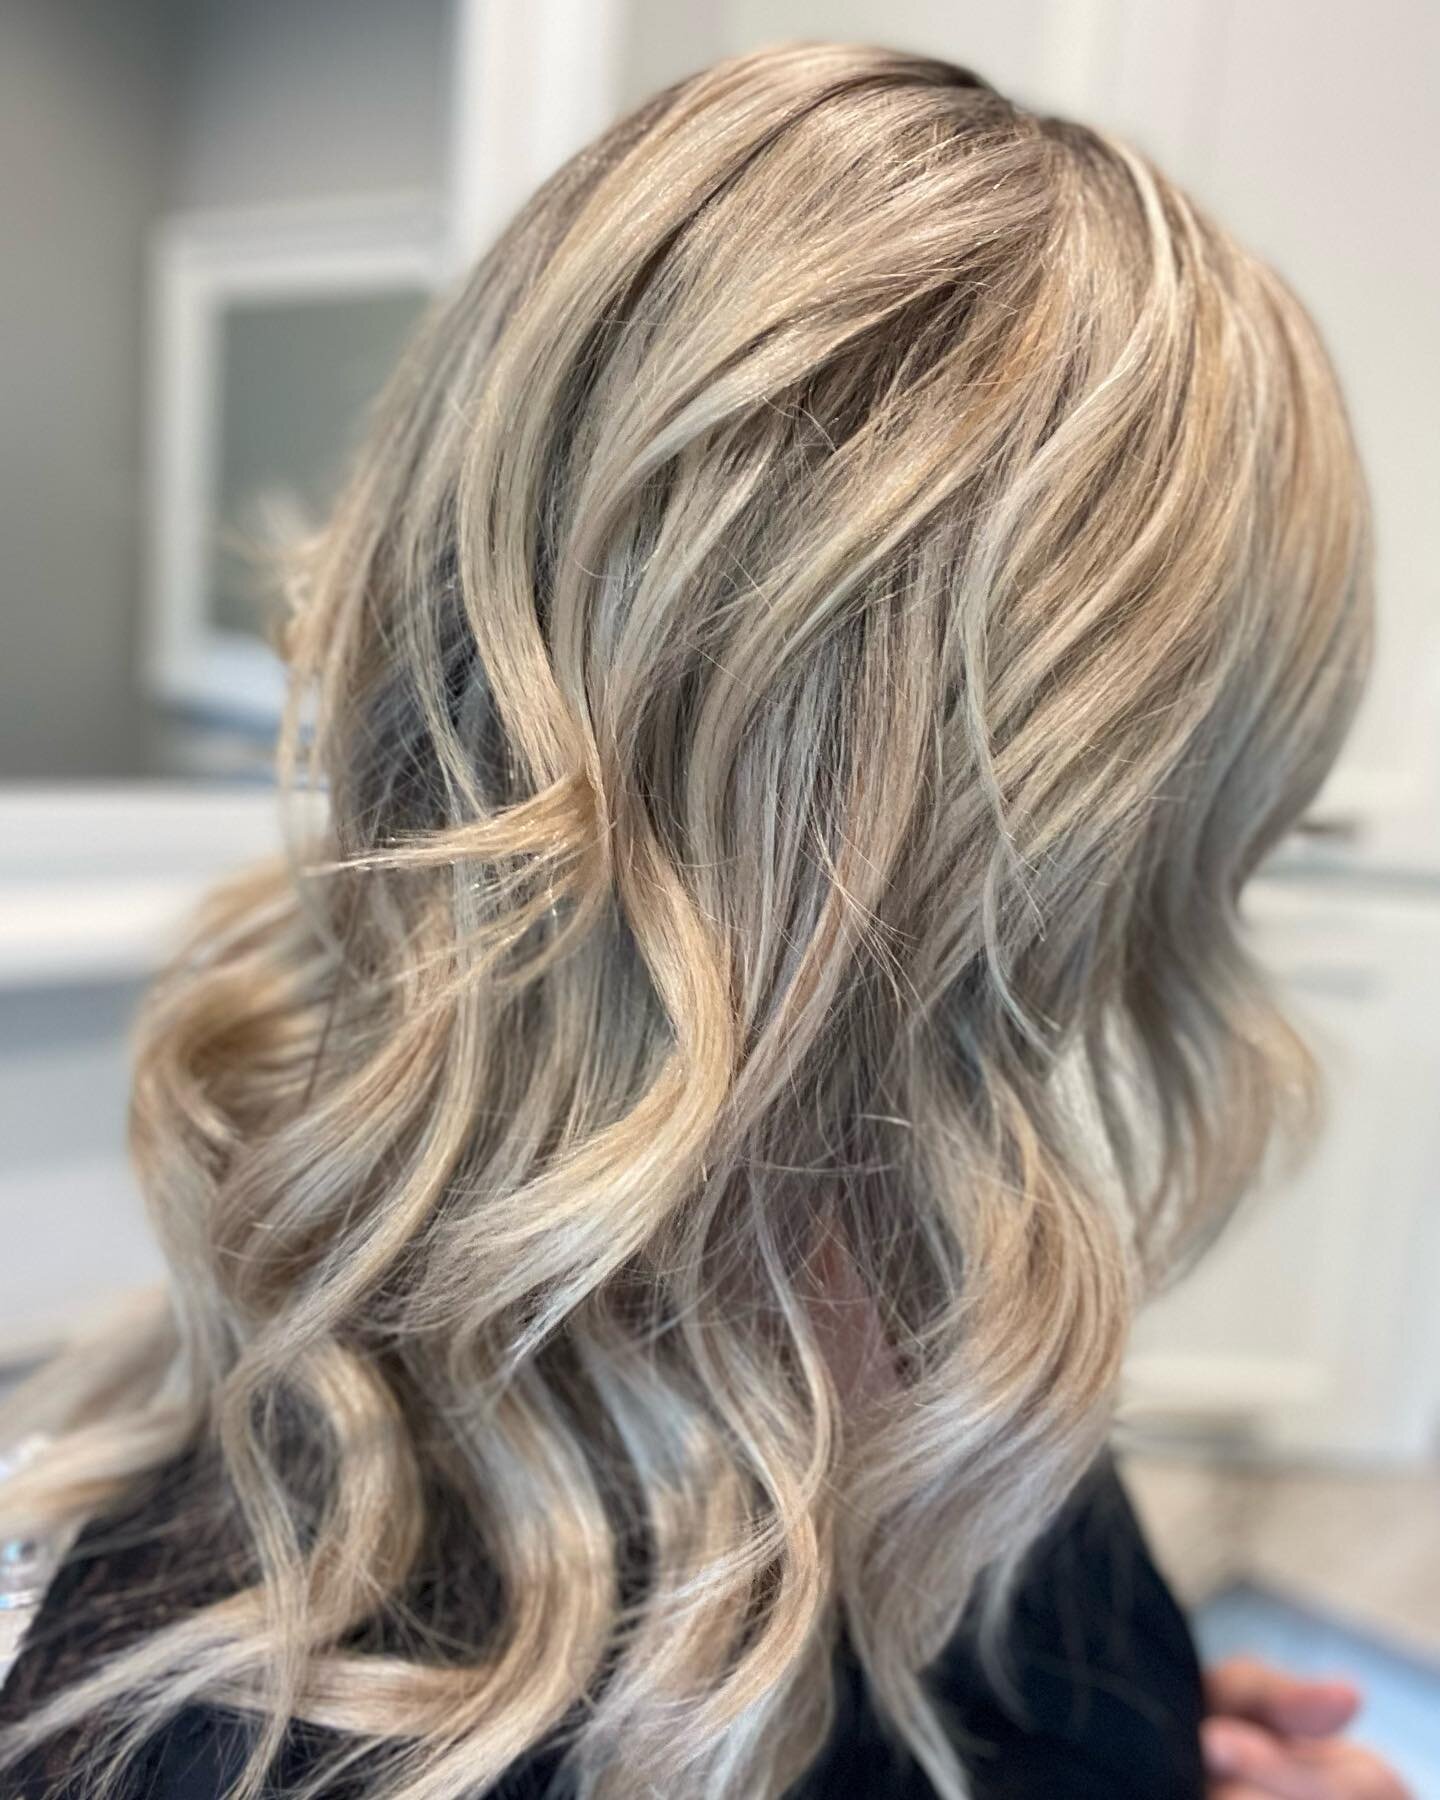 Want to look amazing this weekend with no effort at all? Get into Crown salon for a Luxury blowout and makeup touch up 10am-2-pm today #saratogasprings #saratoga #upstateny #saratogaspringsny #albany #albanyny #cliftonpark #newyork #upstatenewyork #b